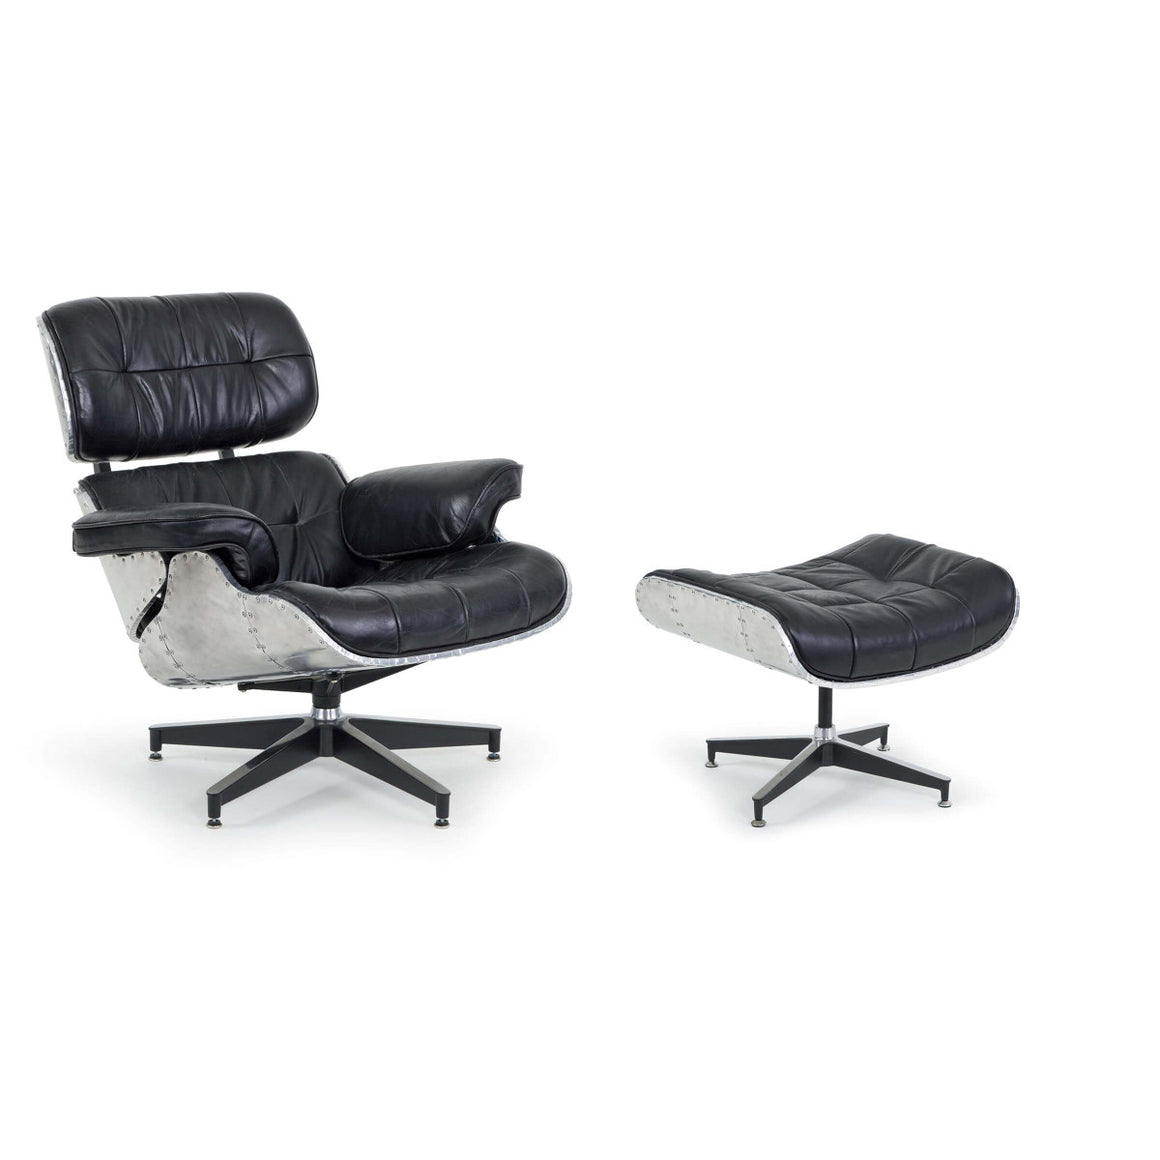 Regina Andrew Aluminum & Leather Lounge Chair with Ottoman - Black